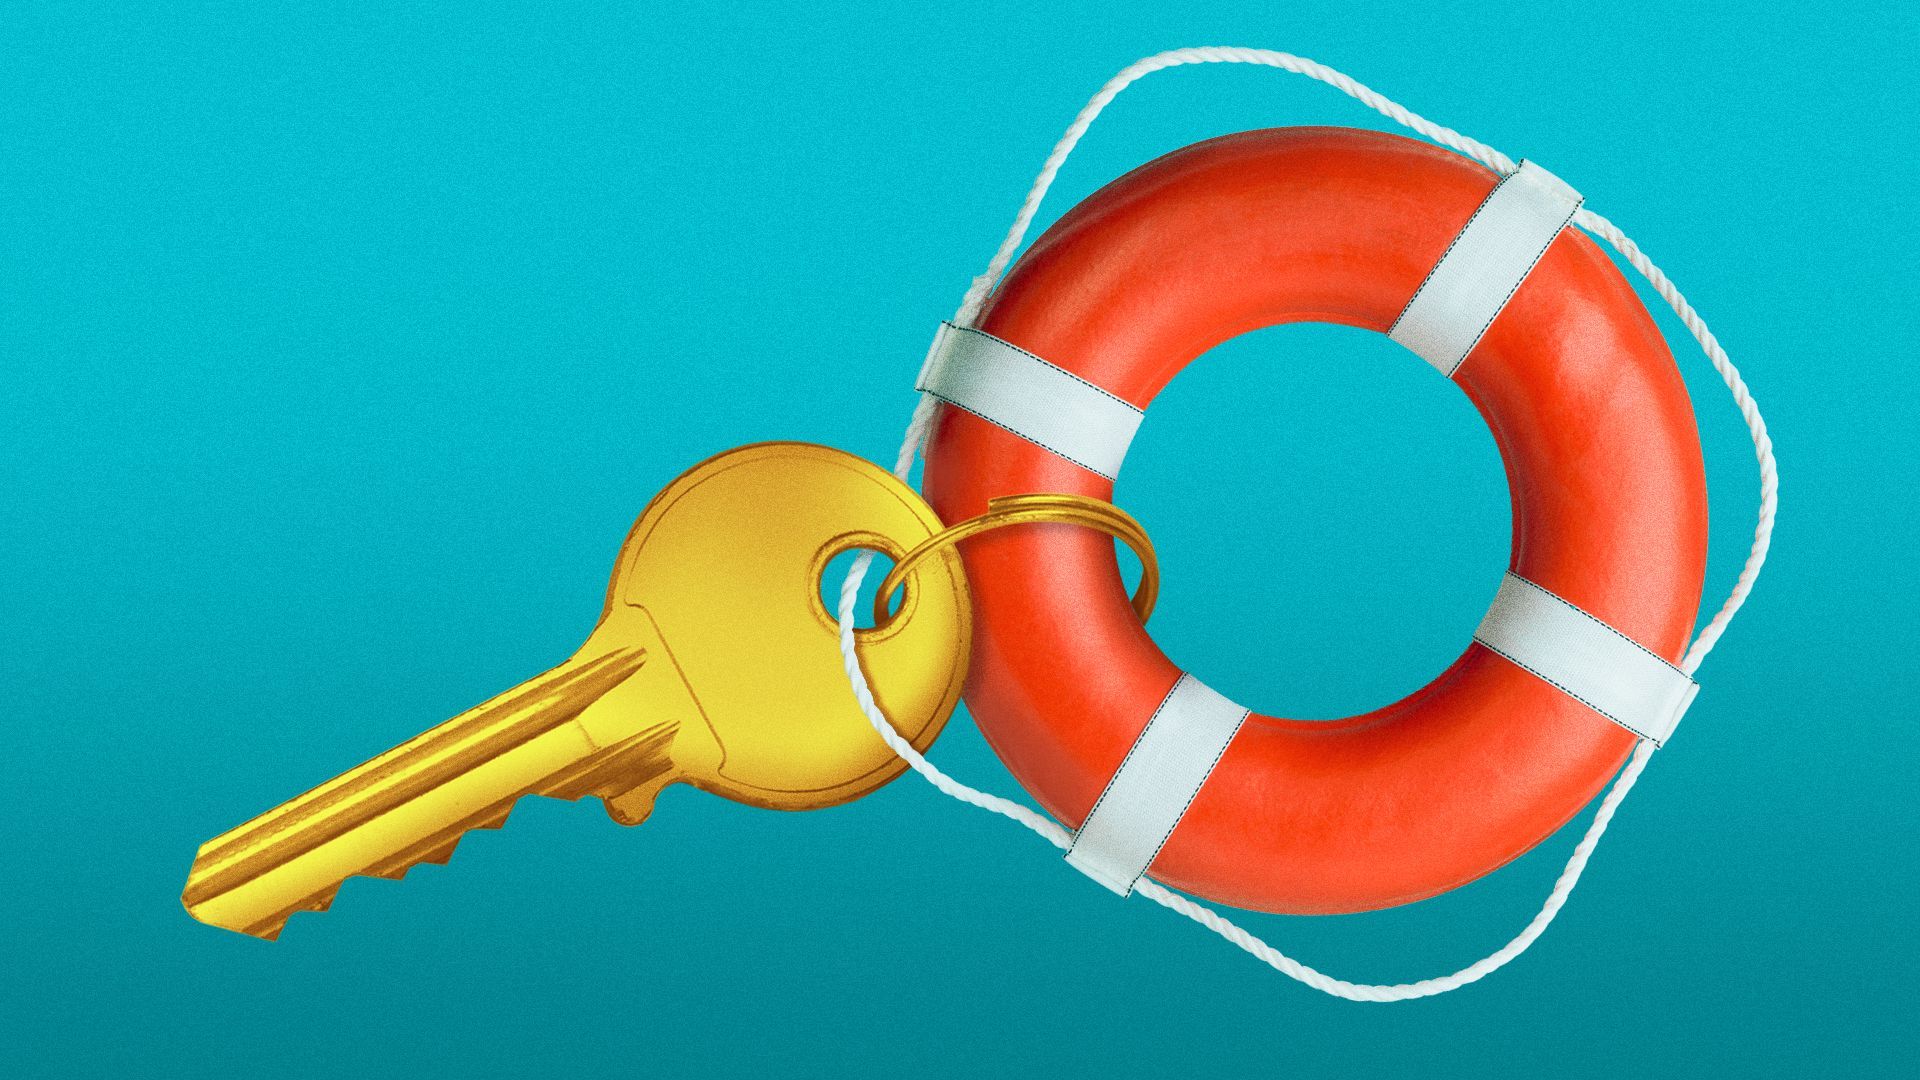 Illustration of a key hanging off of a life preserver.